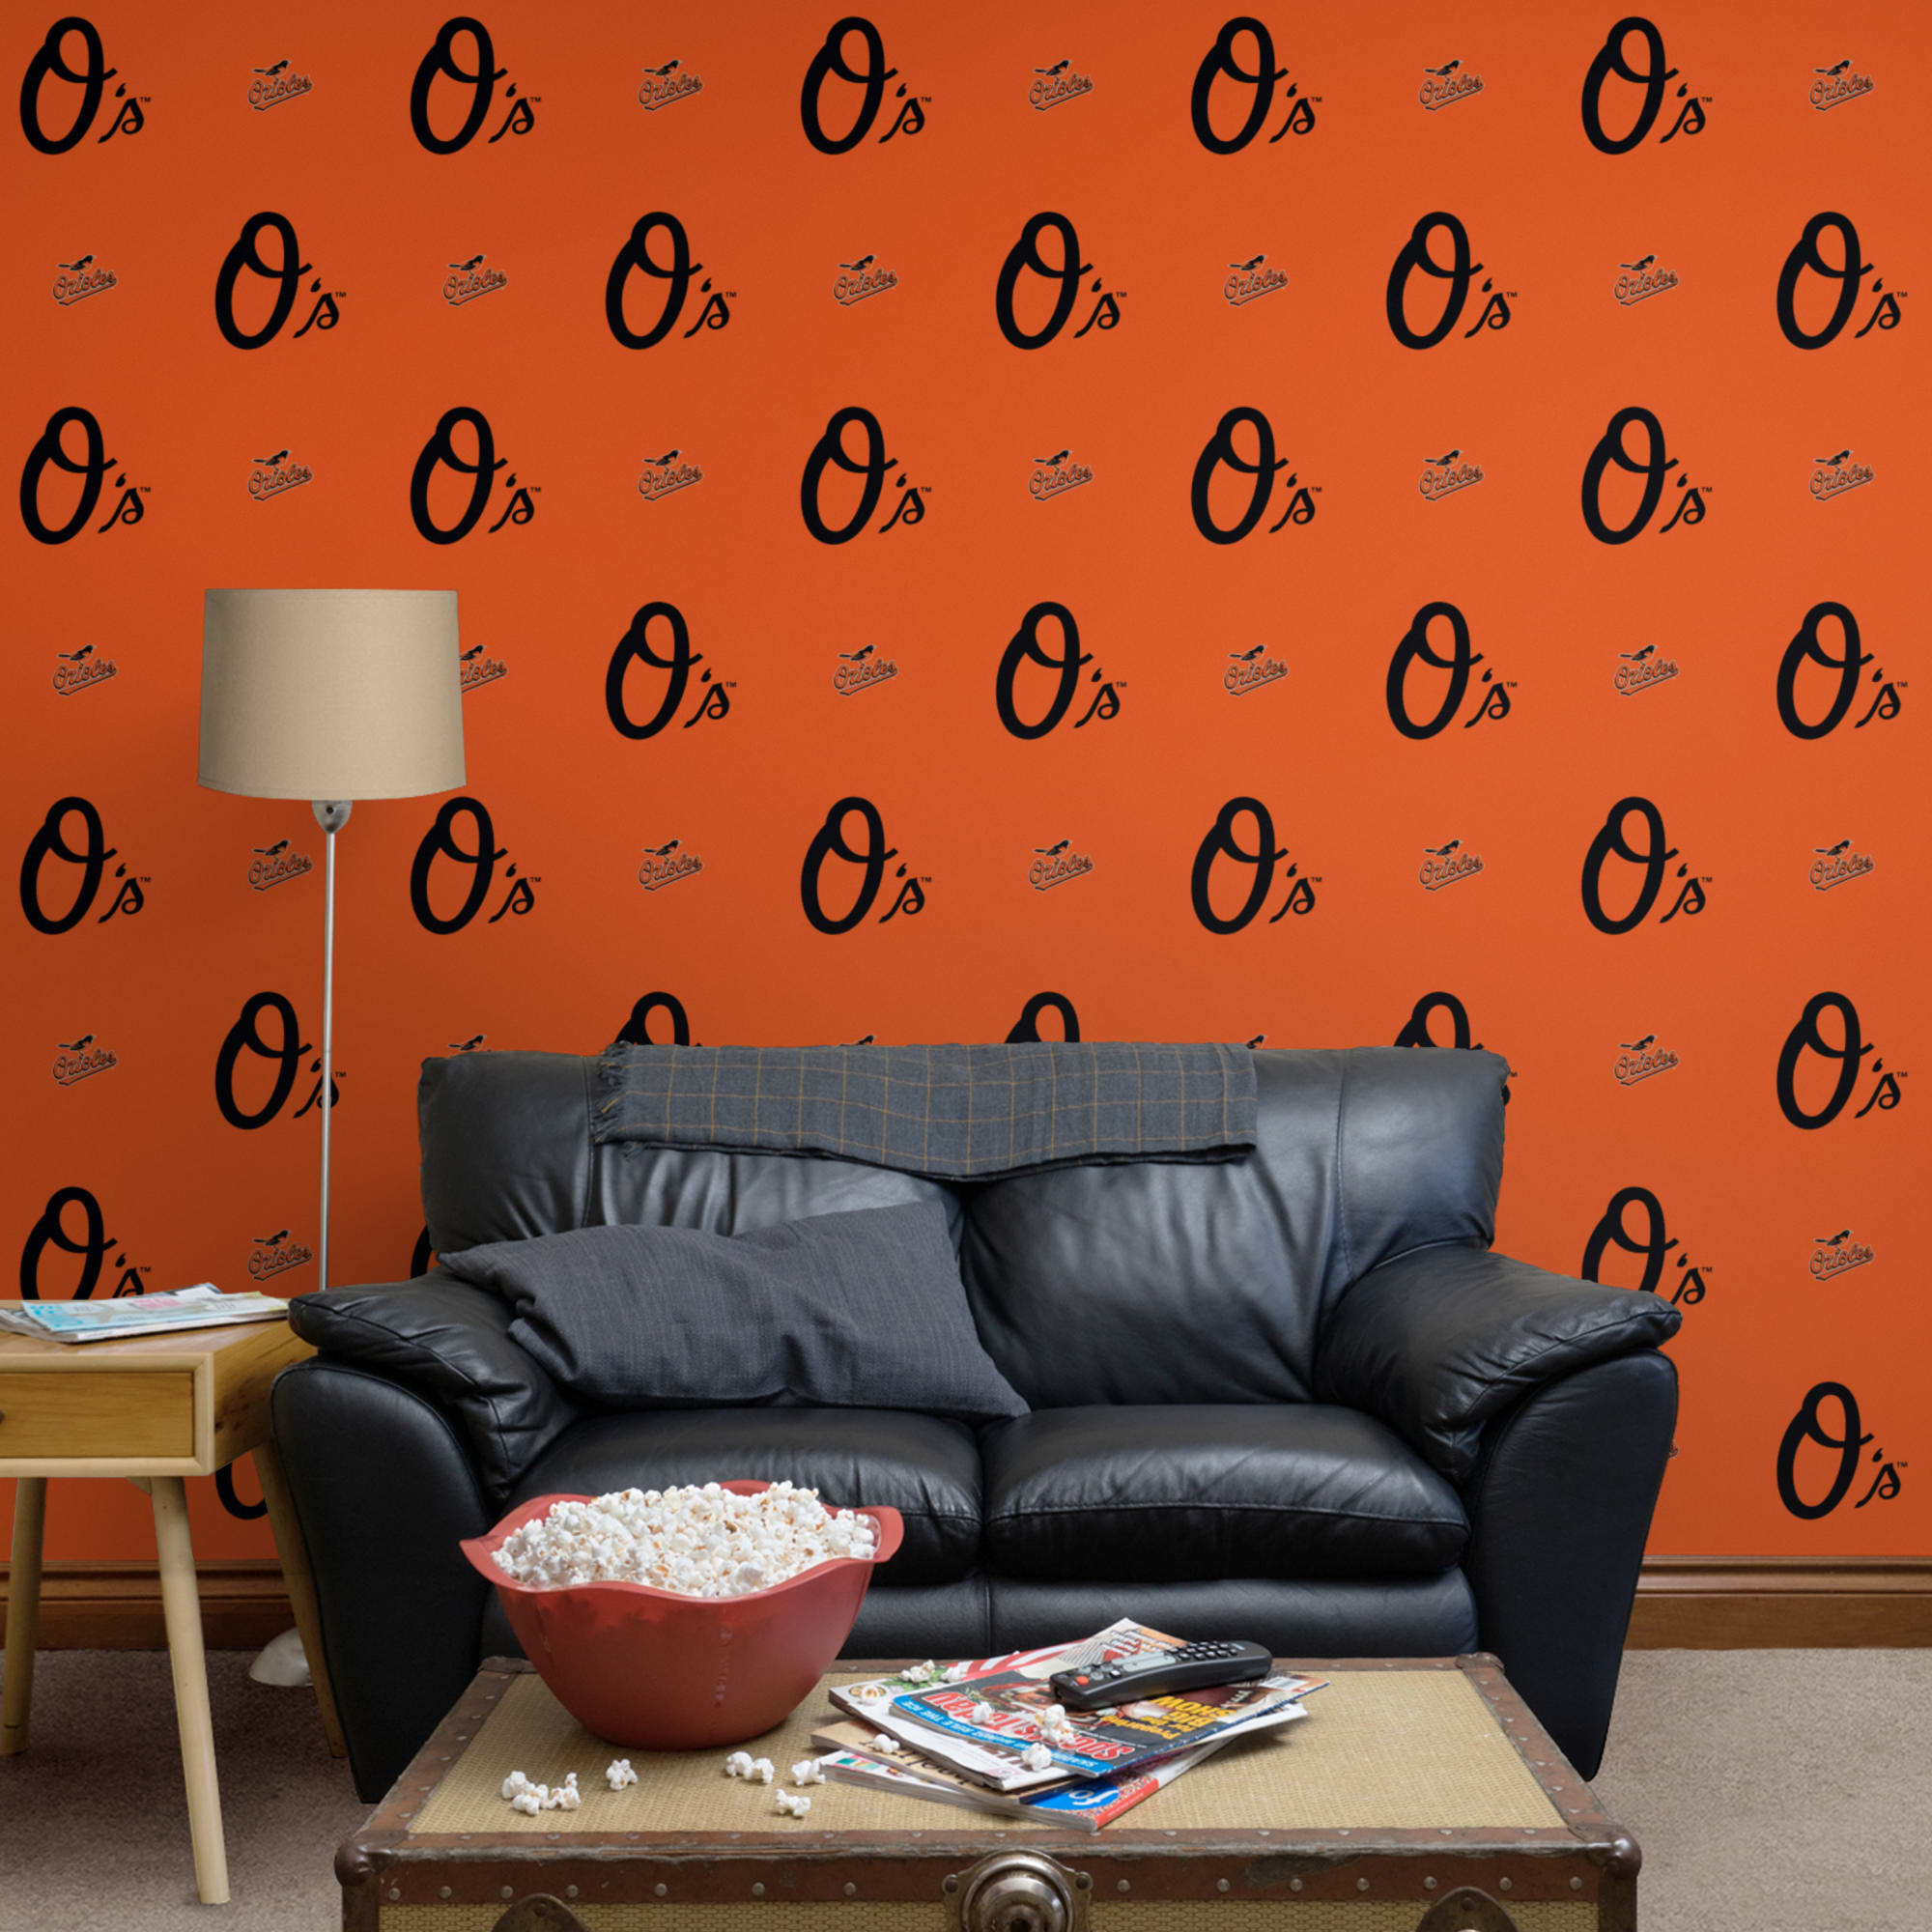 Baltimore Orioles: Logo Pattern - Officially Licensed Removable Wallpaper 12" x 12" Sample by Fathead